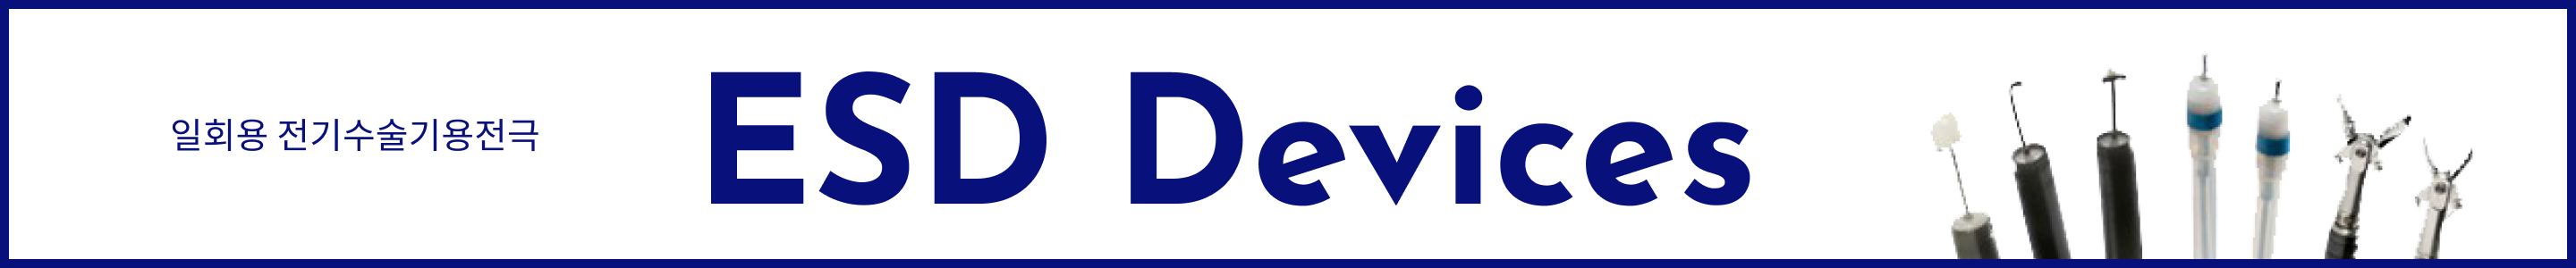 ESD Devices